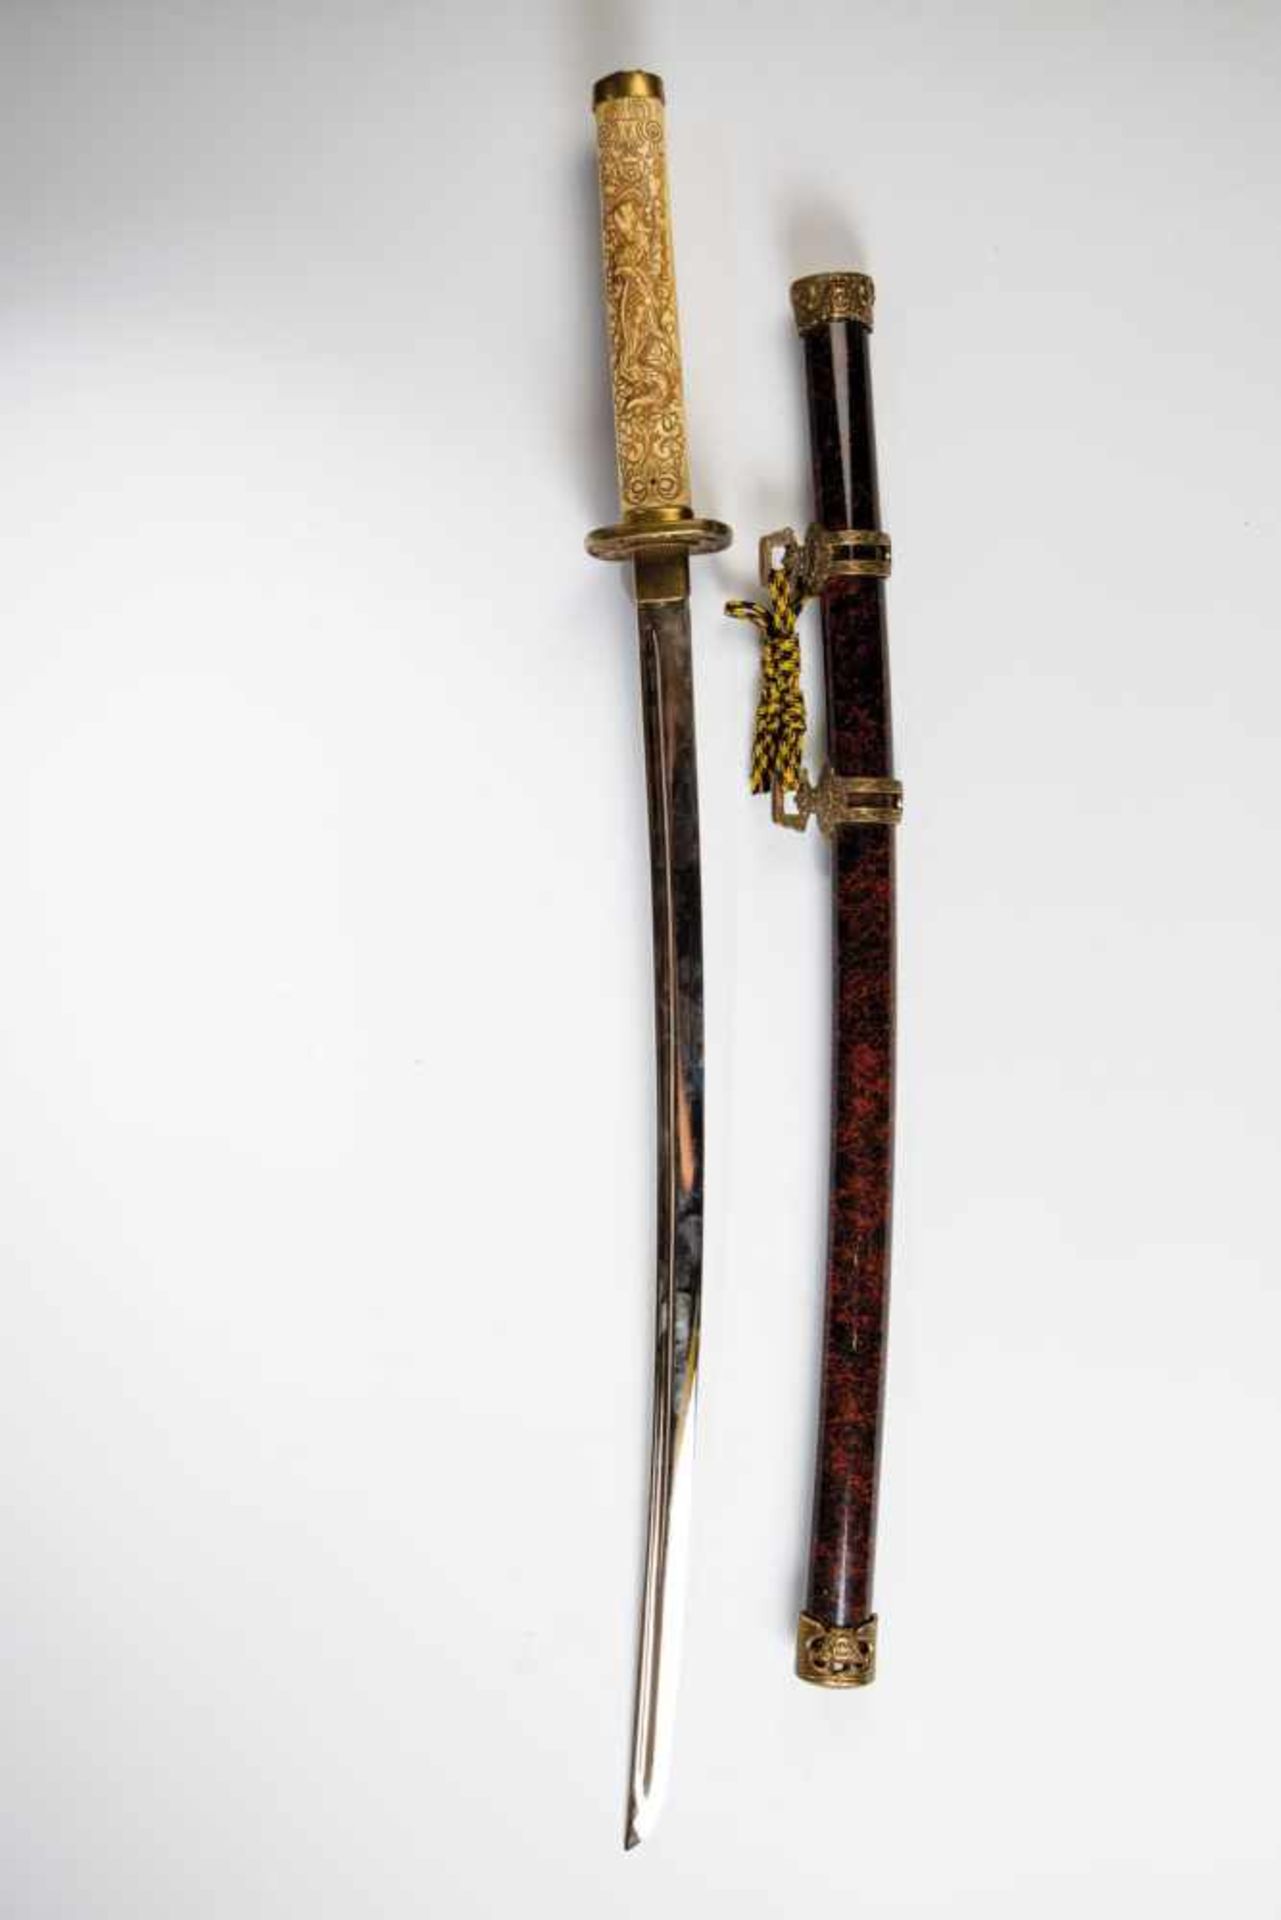 Decorative sword. China, 20./21. century. Handle decorated with floral and dragon carvingsand